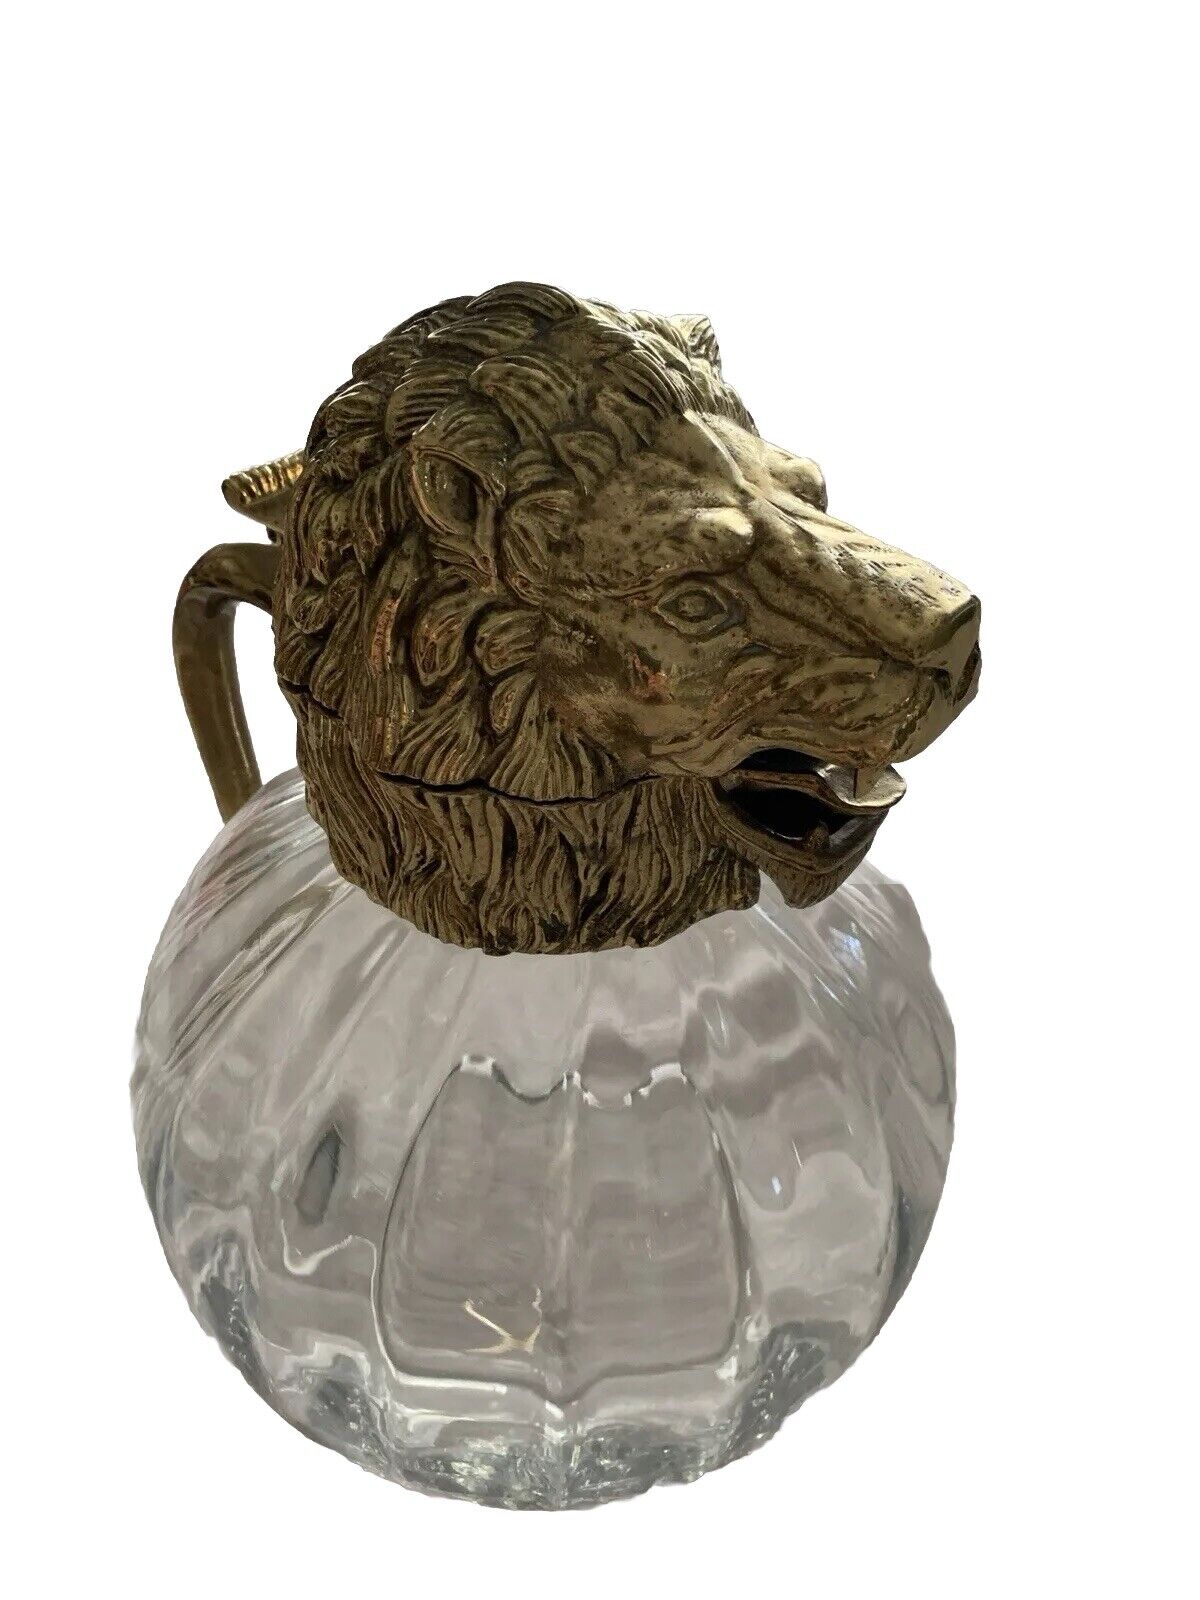 Vintage RARE Signed Valenti Glass Pitcher Brass Lion Head FINELY CRAFTED